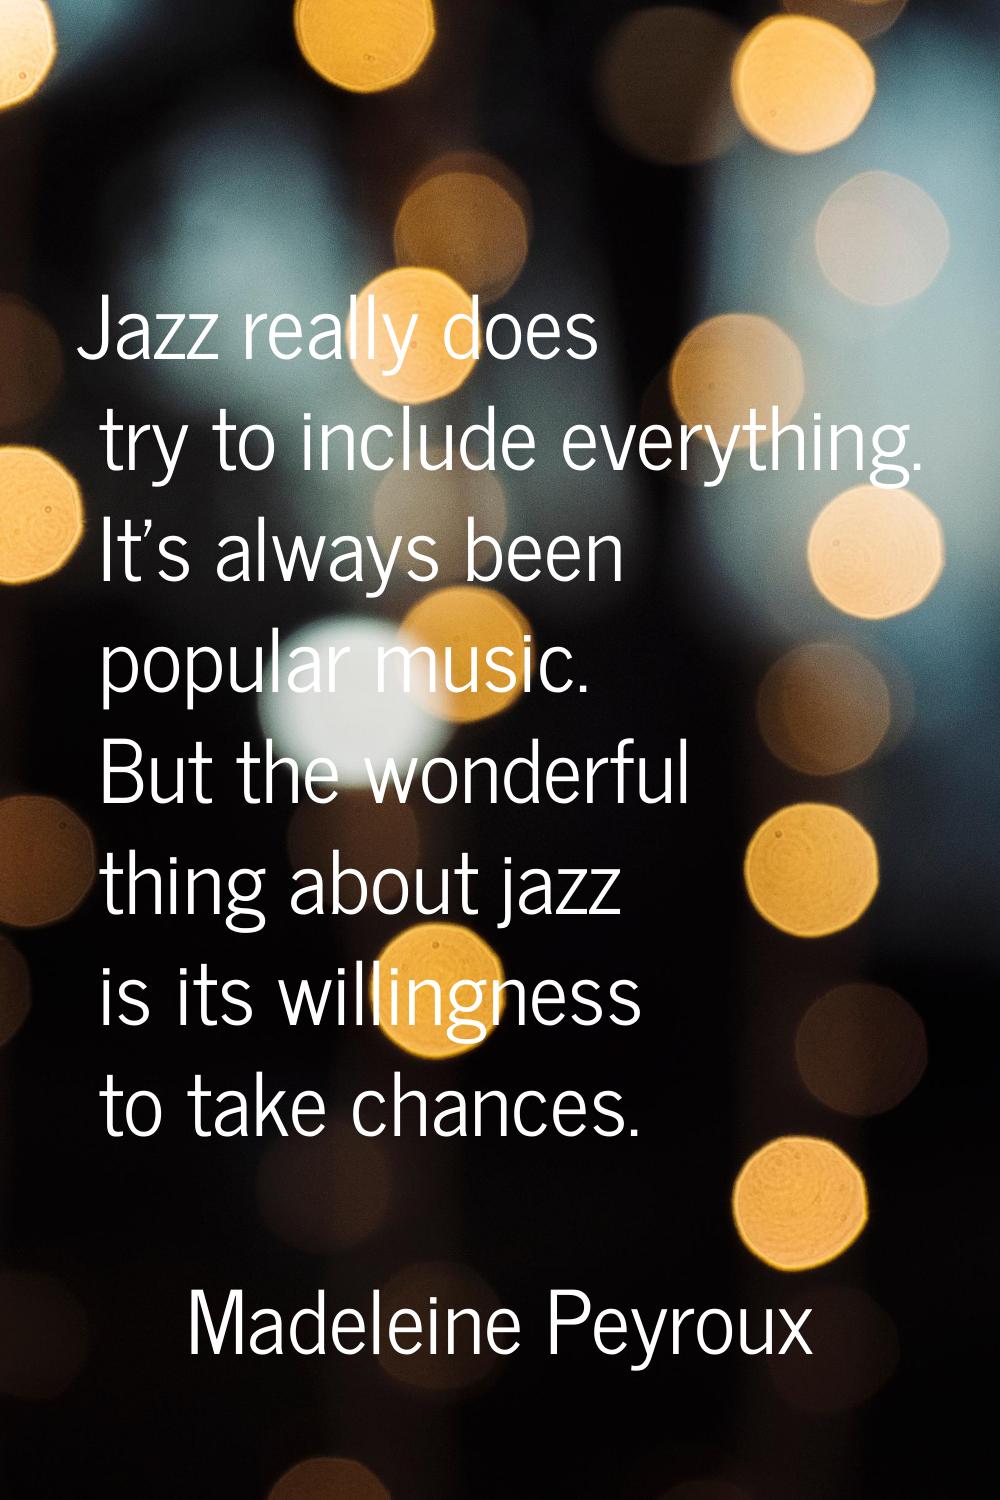 Jazz really does try to include everything. It's always been popular music. But the wonderful thing